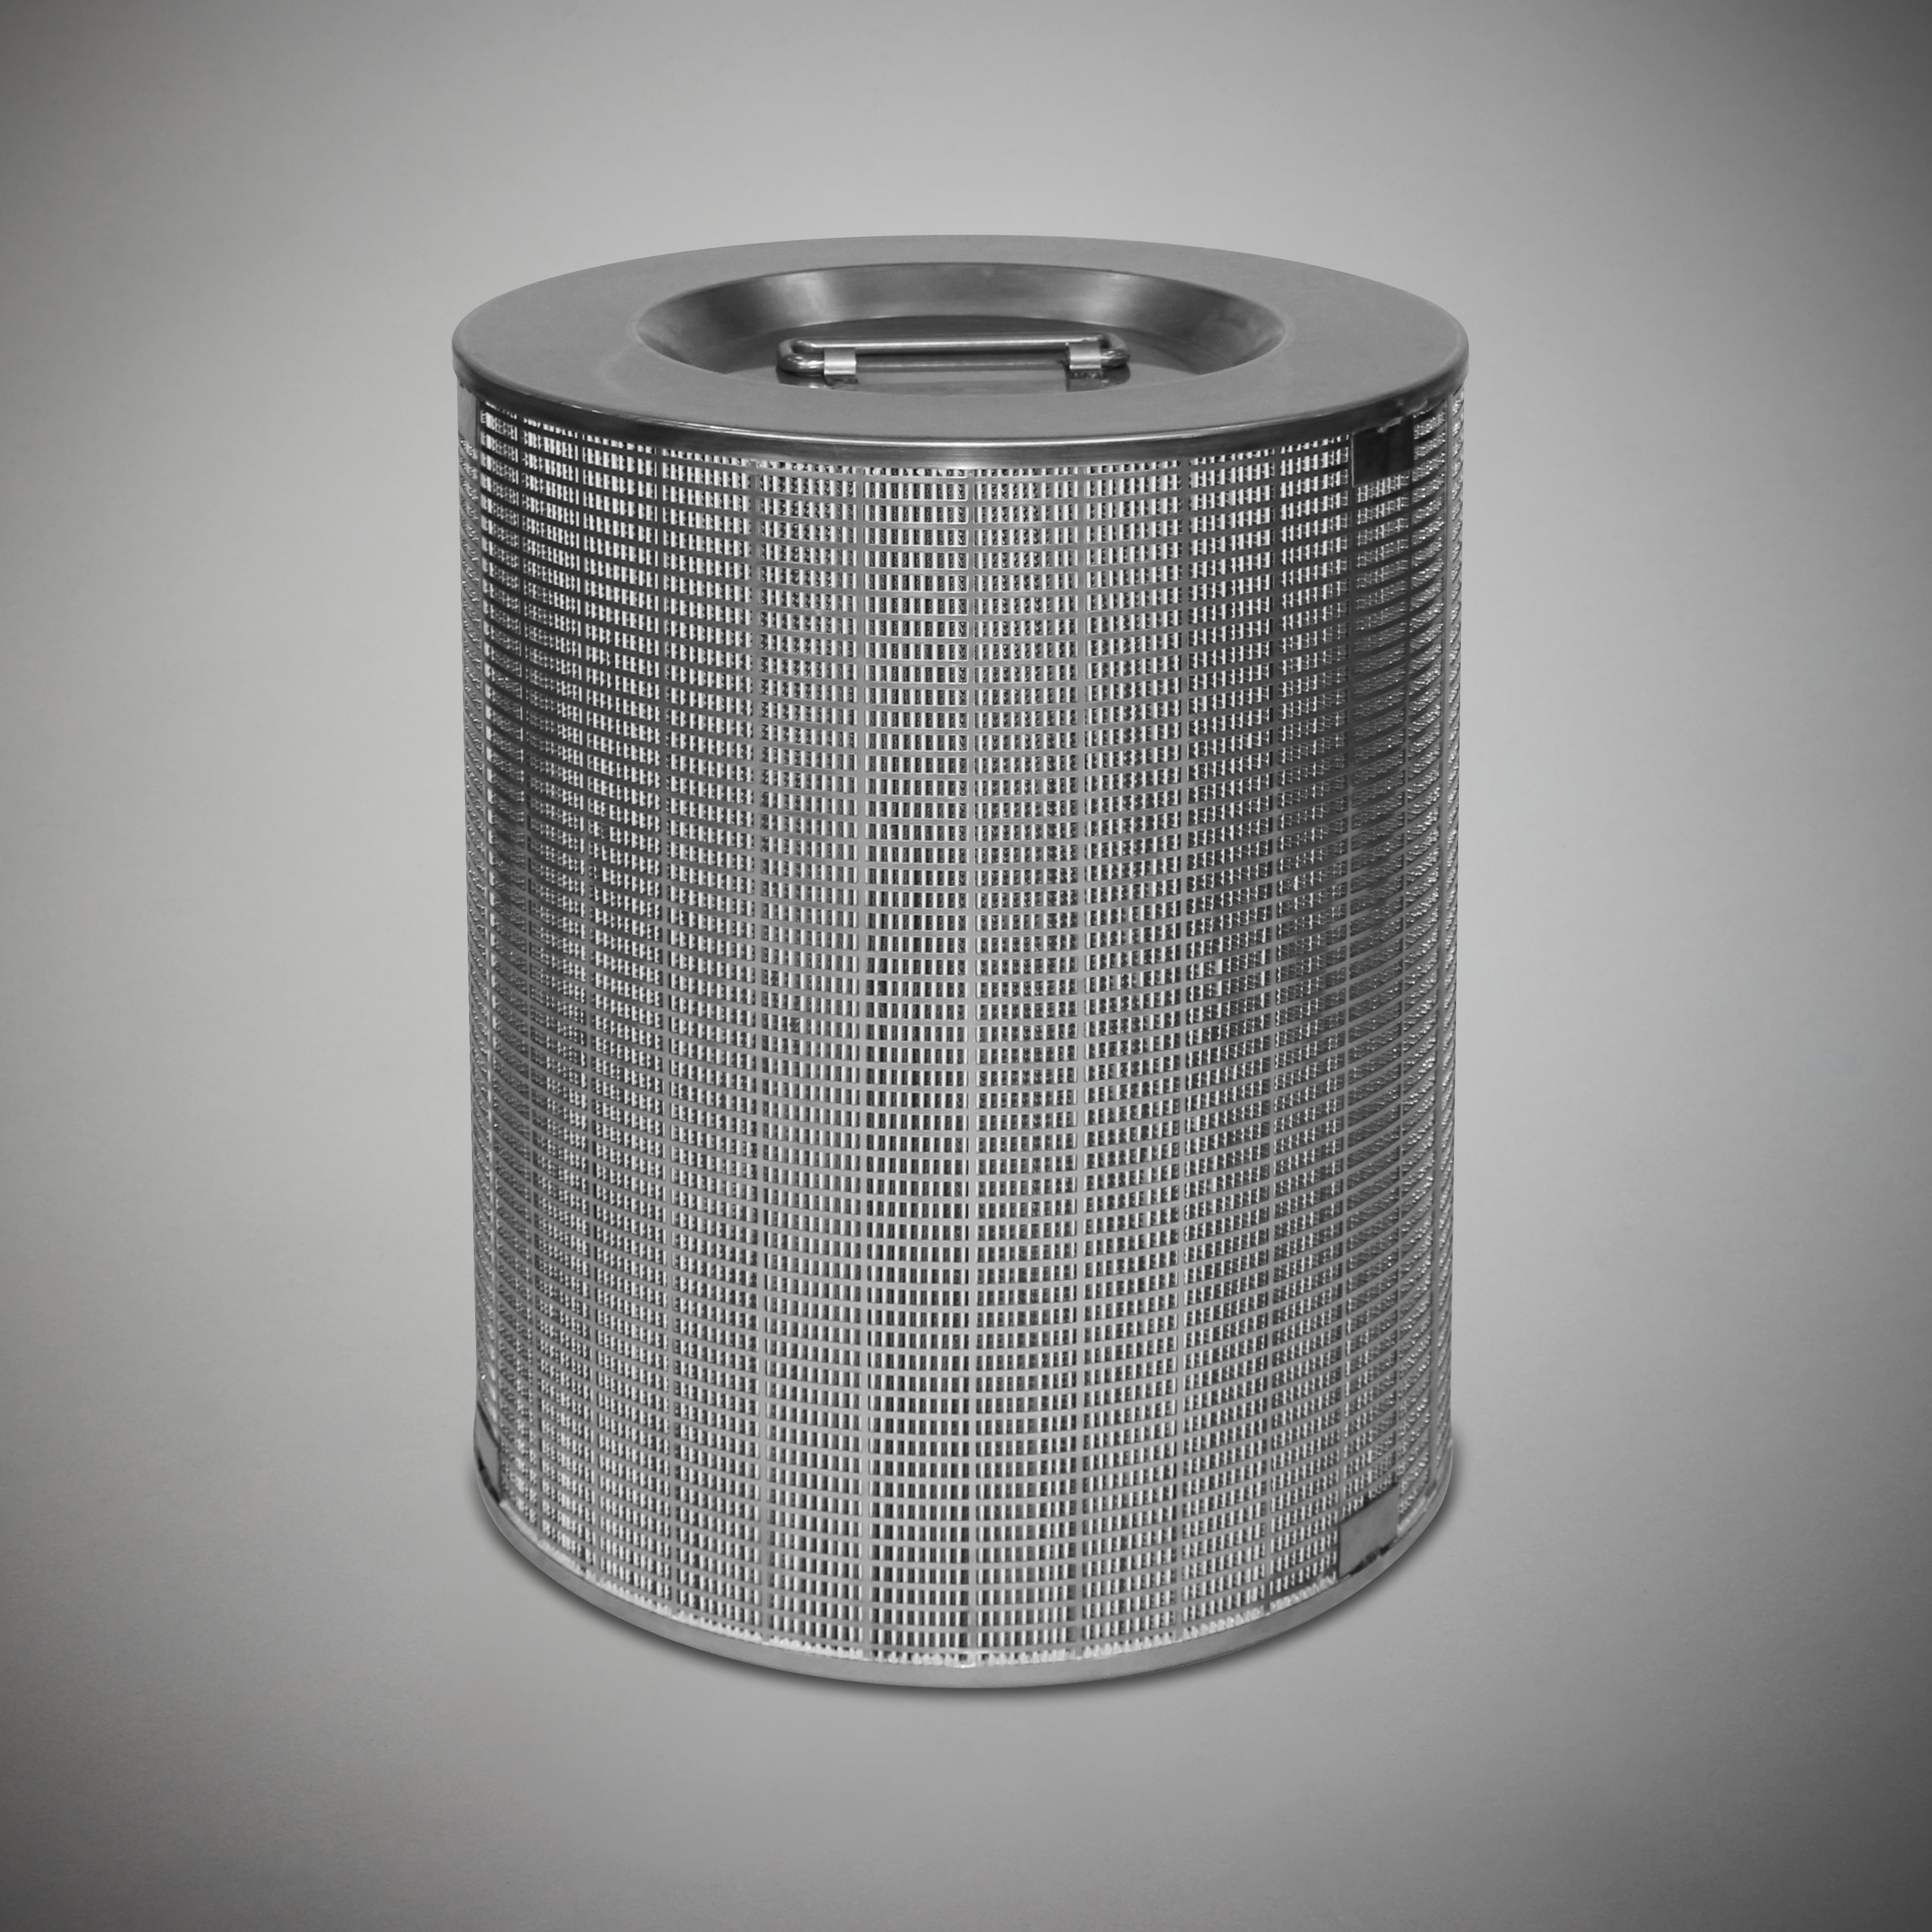 The high flow, high strength, radial flow HEPA filters are capable of handling large volumes of gases at high differential pressures in high humidity environments.